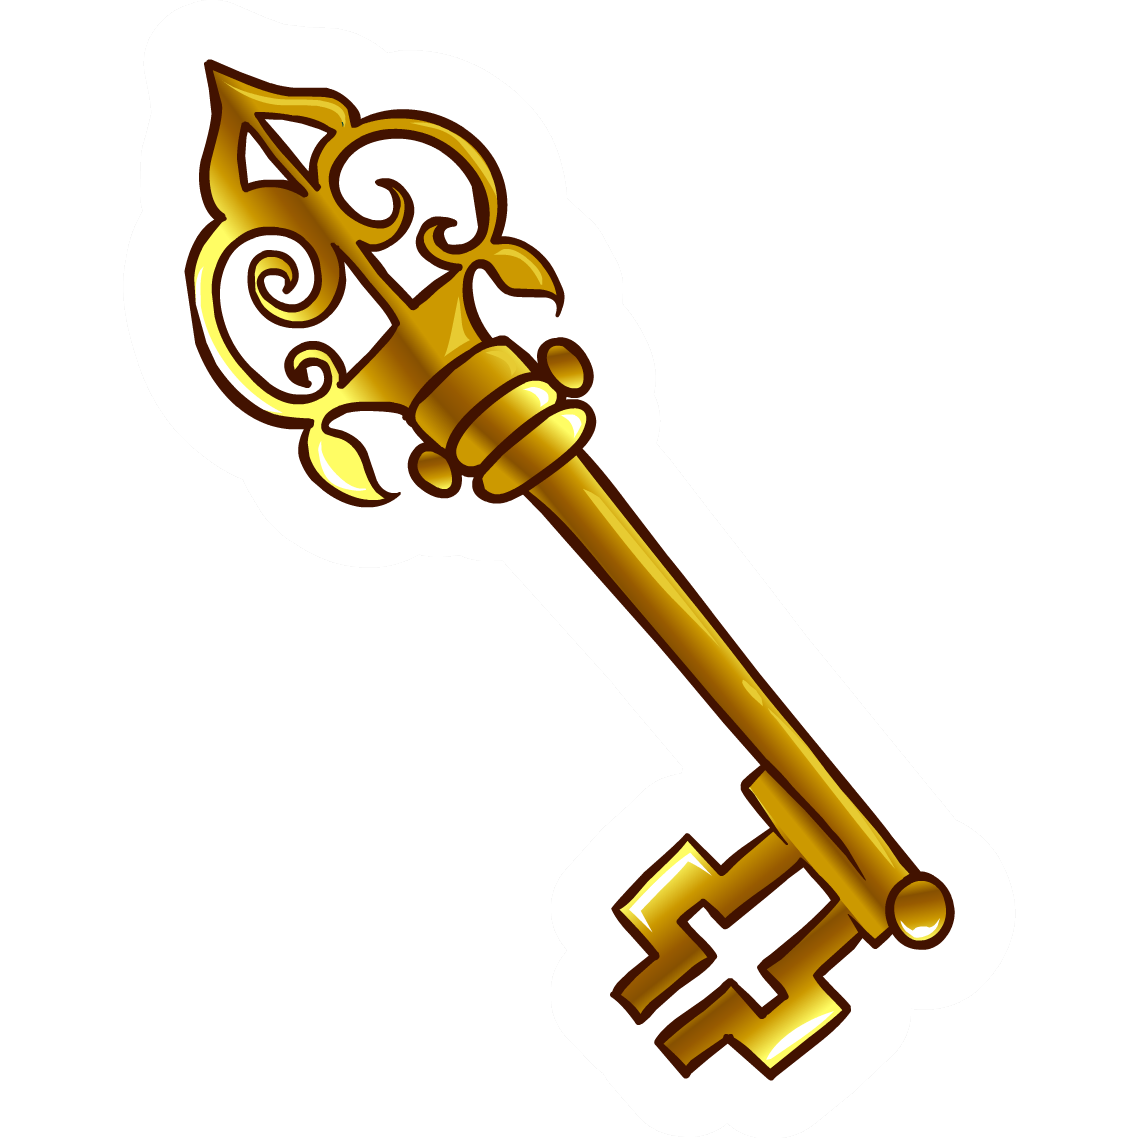 Old key clipart clipart kid 6